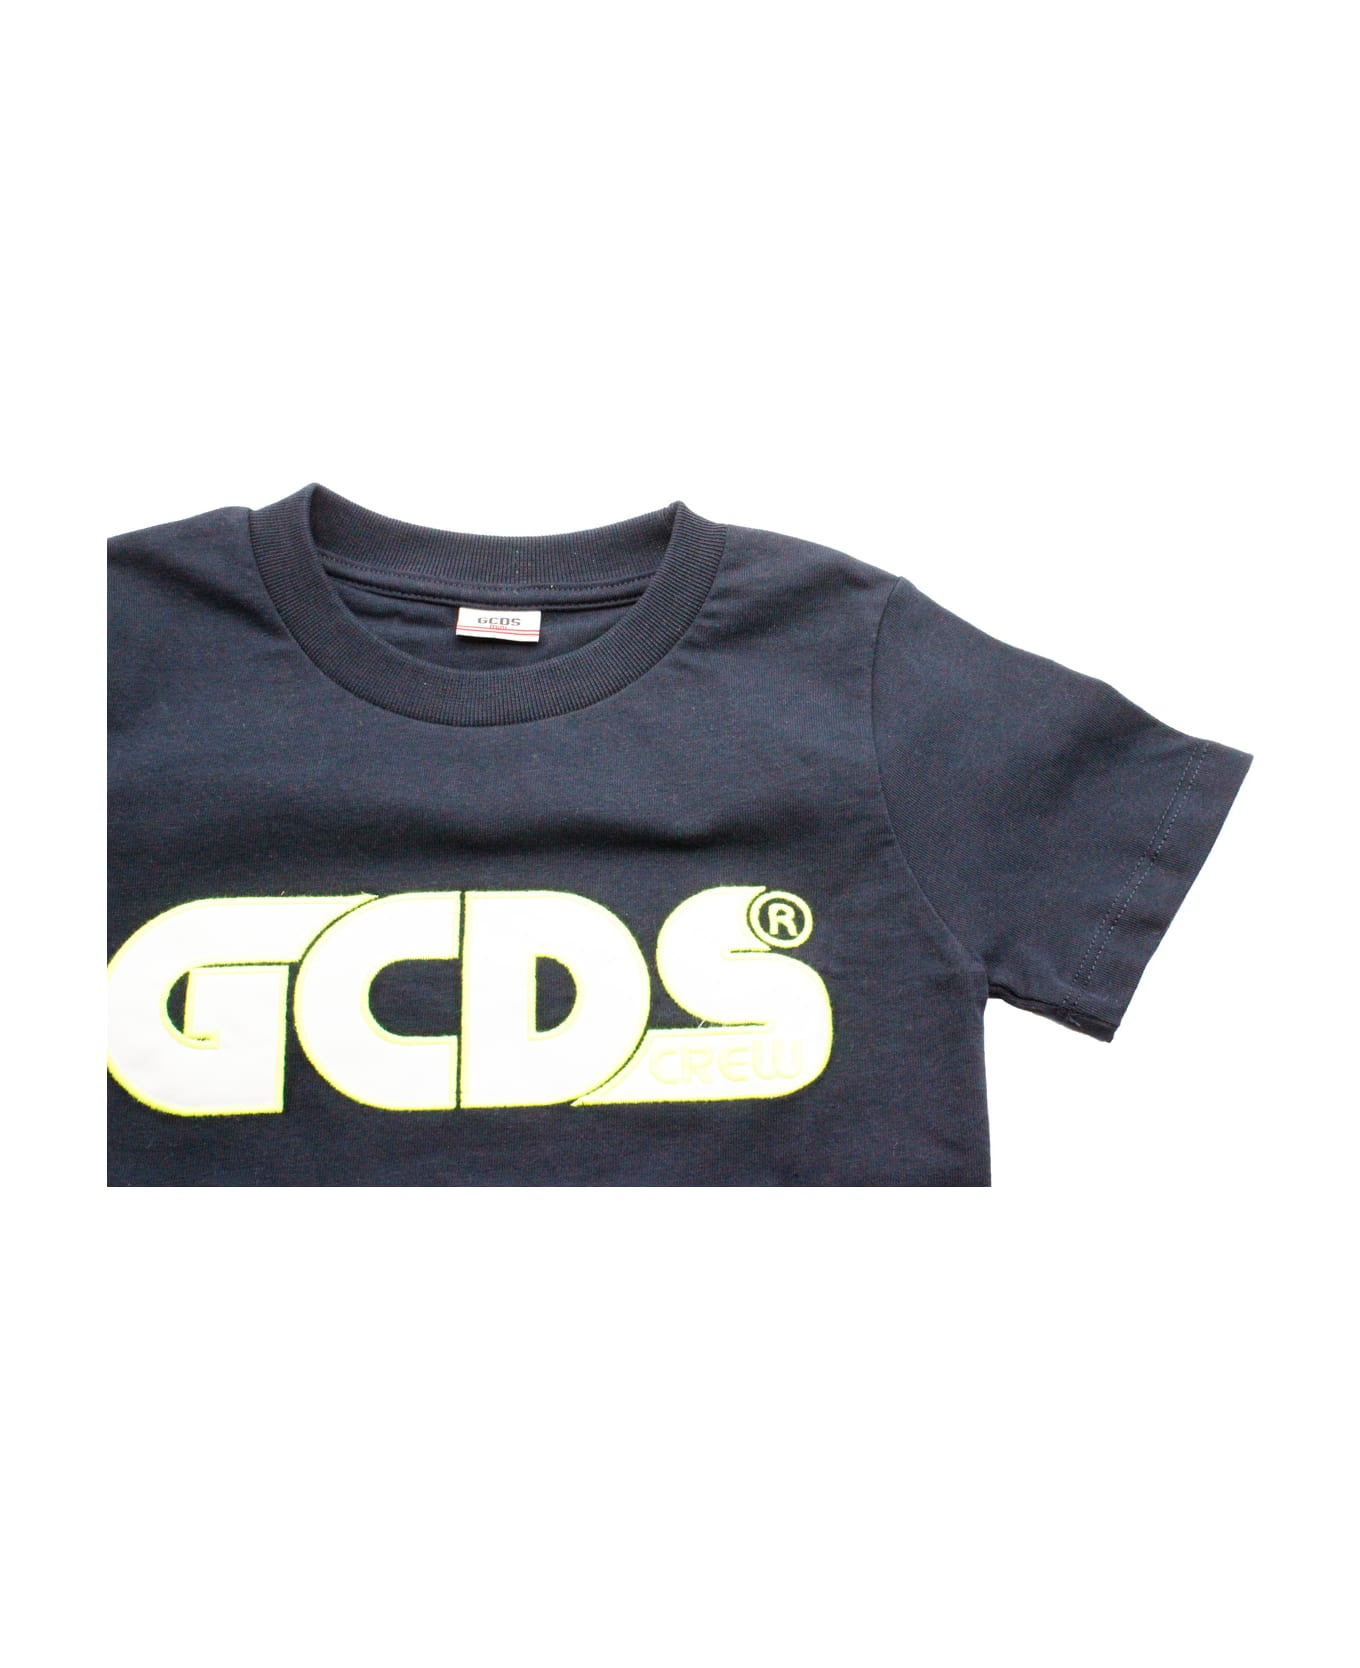 GCDS Short-sleeved Crew Neck T-shirt With Fluorescent Lettering And Profiles - Blu